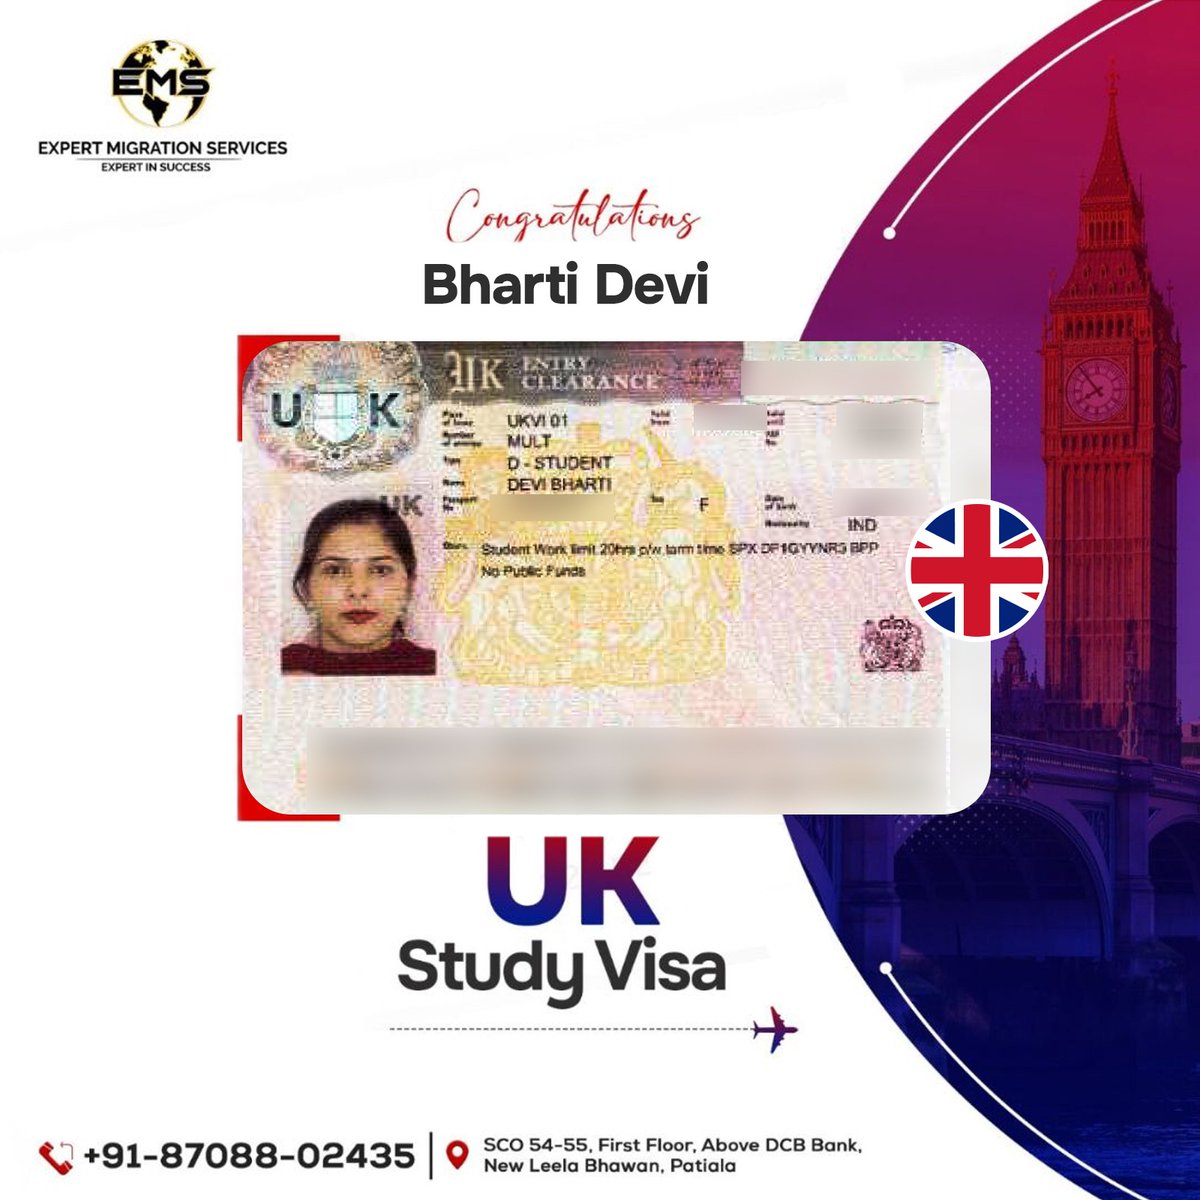 📷📷 UK Study Visa Success Story: Bharti Devi's successful visa application with Expert Migration Services paves the way for her academic journey. 📷
We can help you achieve your study goals too!

.
.
.
#ExpertMigrationServices #StudyinUK #SettleInUK #ImmigrationConsultant